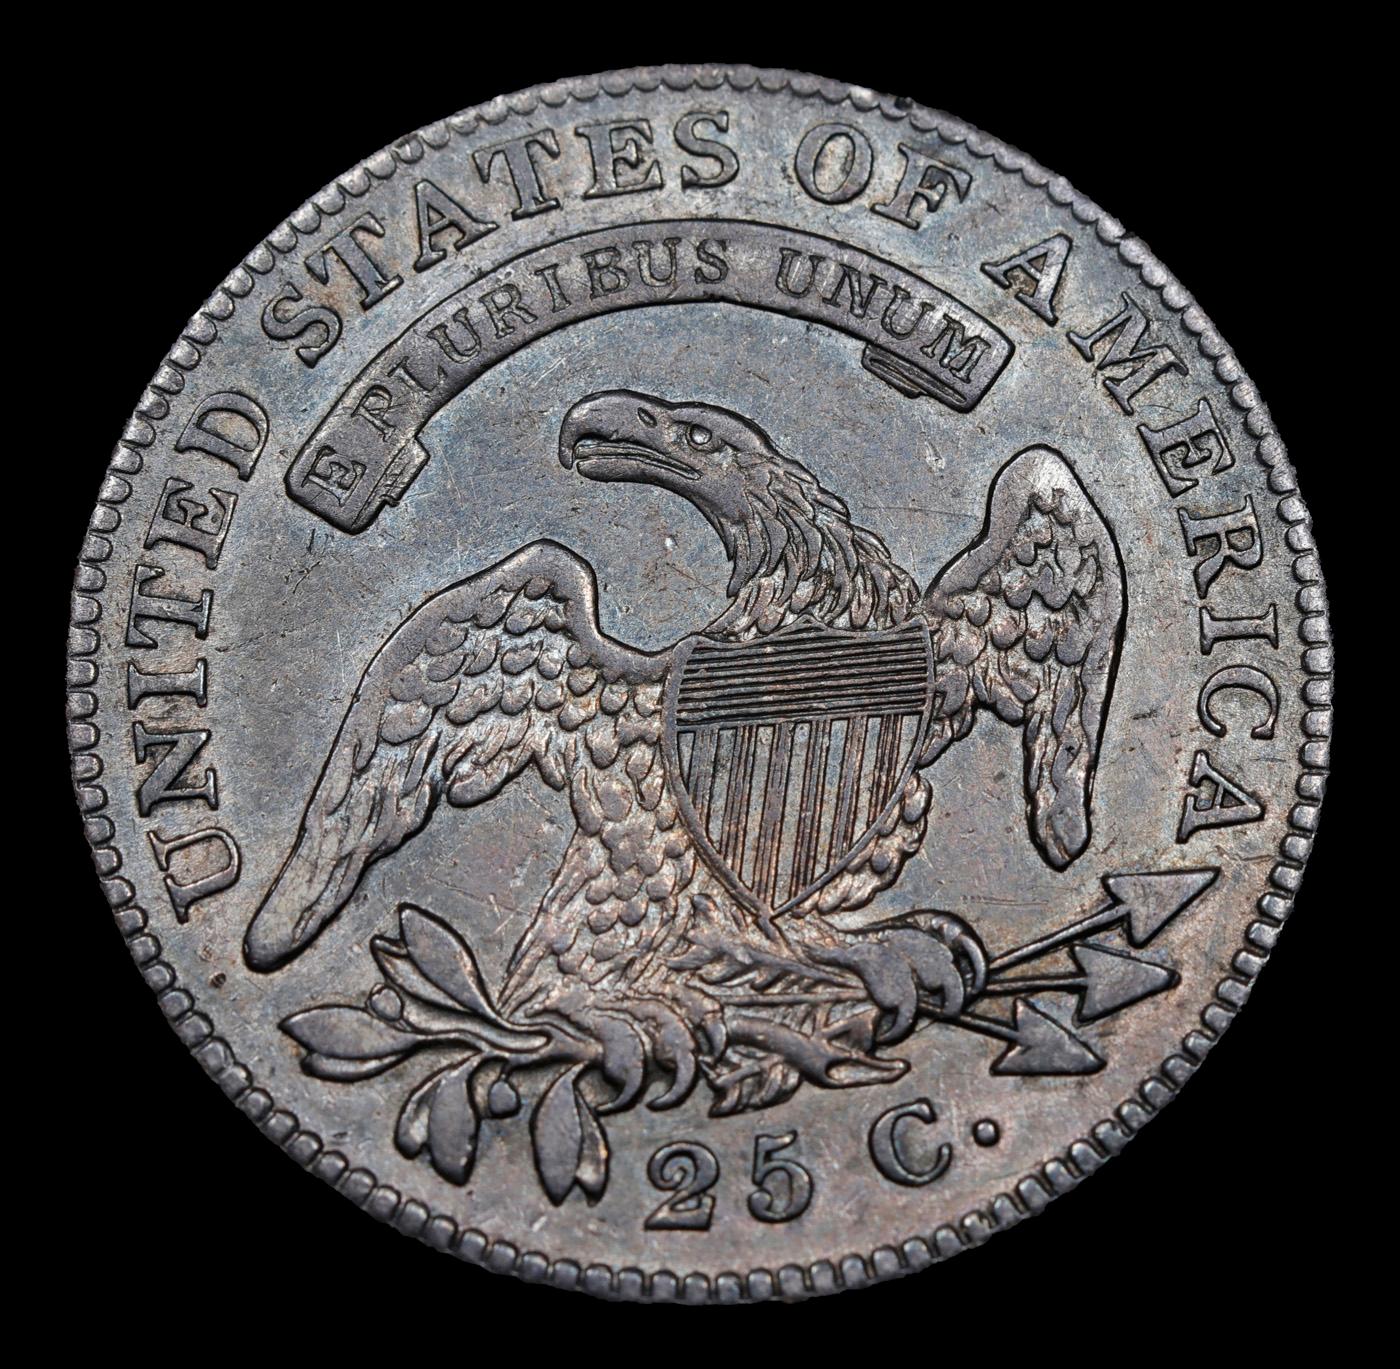 ***Auction Highlight*** 1825/4/2 B-1 Capped Bust Quarter 25c Graded au50 By SEGS (fc)